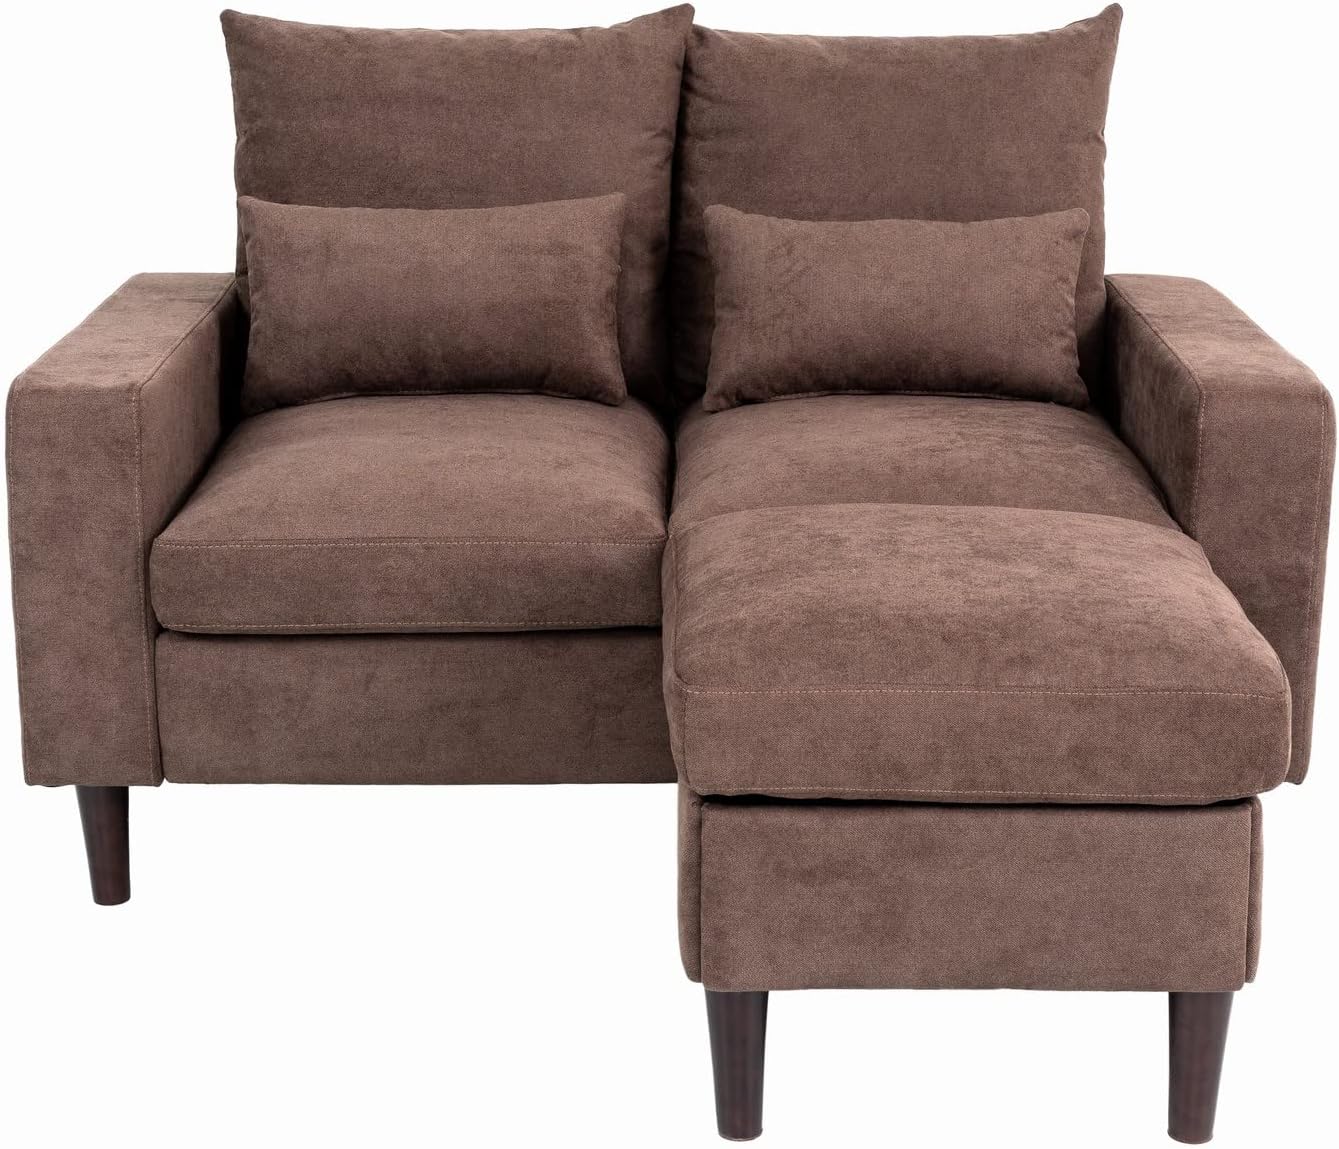 The Essential Loveseat Sectional